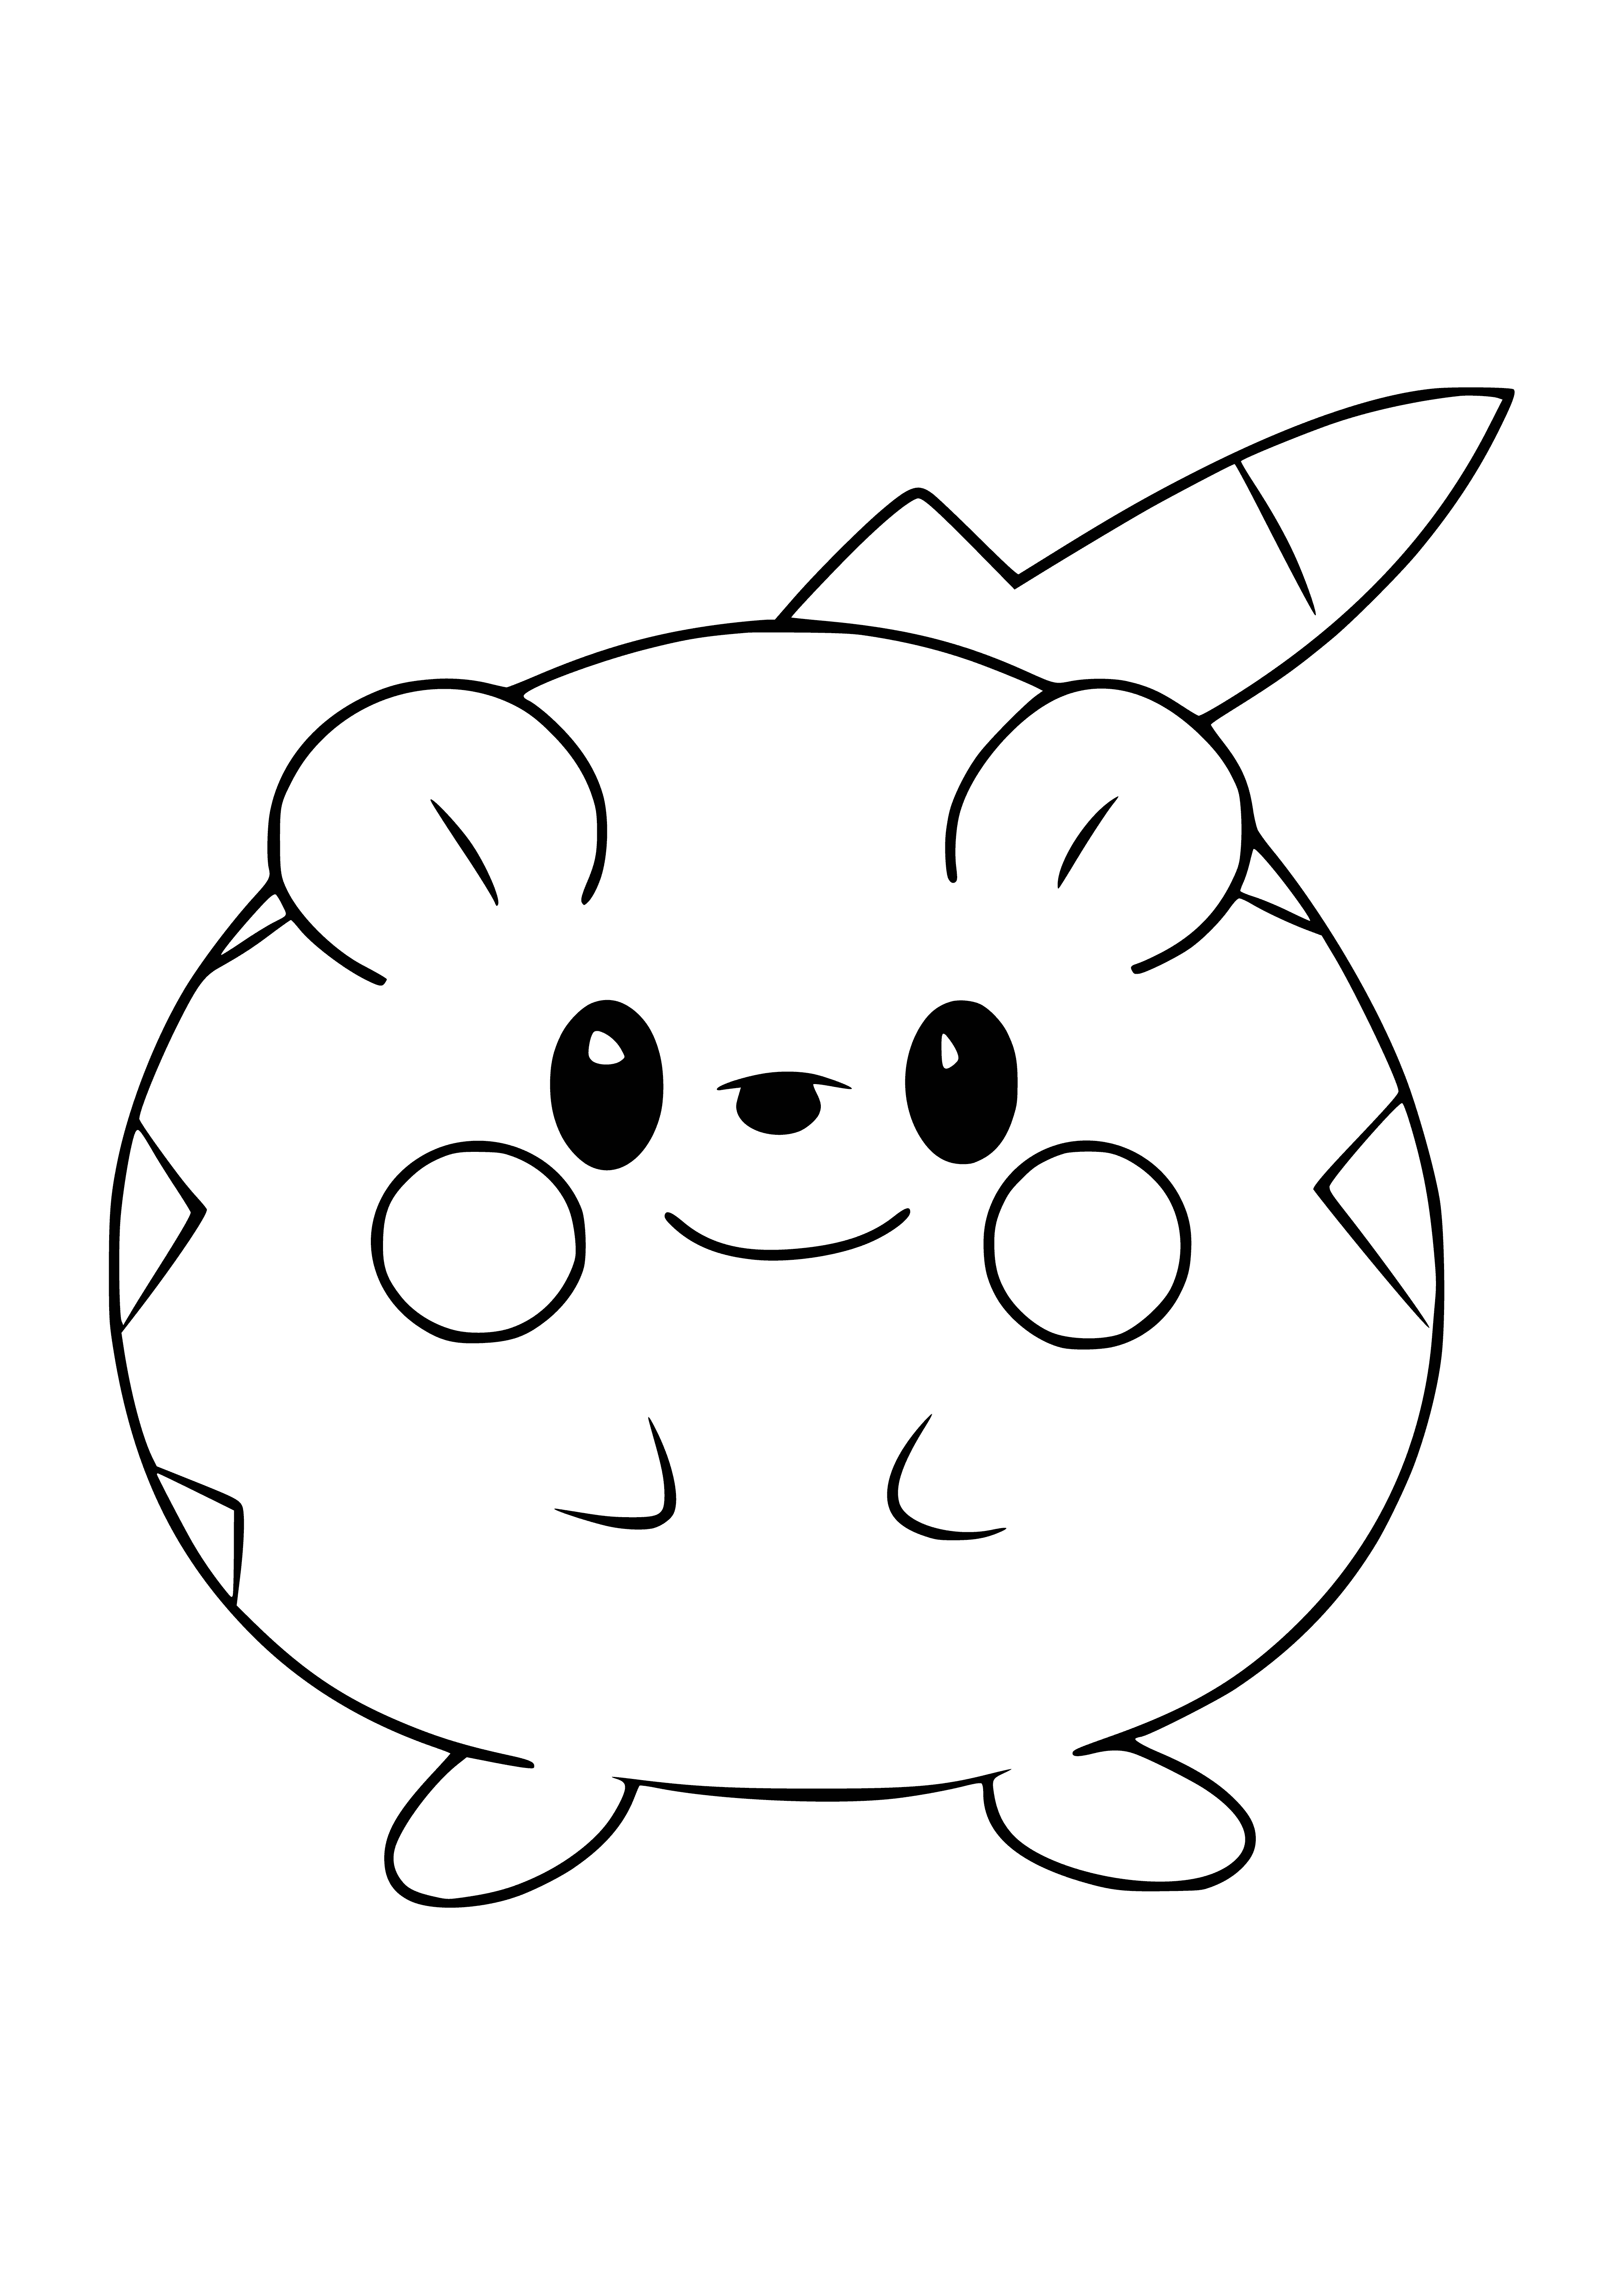 Small, spiky, round Pokemon w/ brown body, cream underbelly, black stripes, line, 2 big eyes, small nose, wide mouth, hanging tongue, 2 small ears, & short, stubby arms/legs ending in spiky tips.